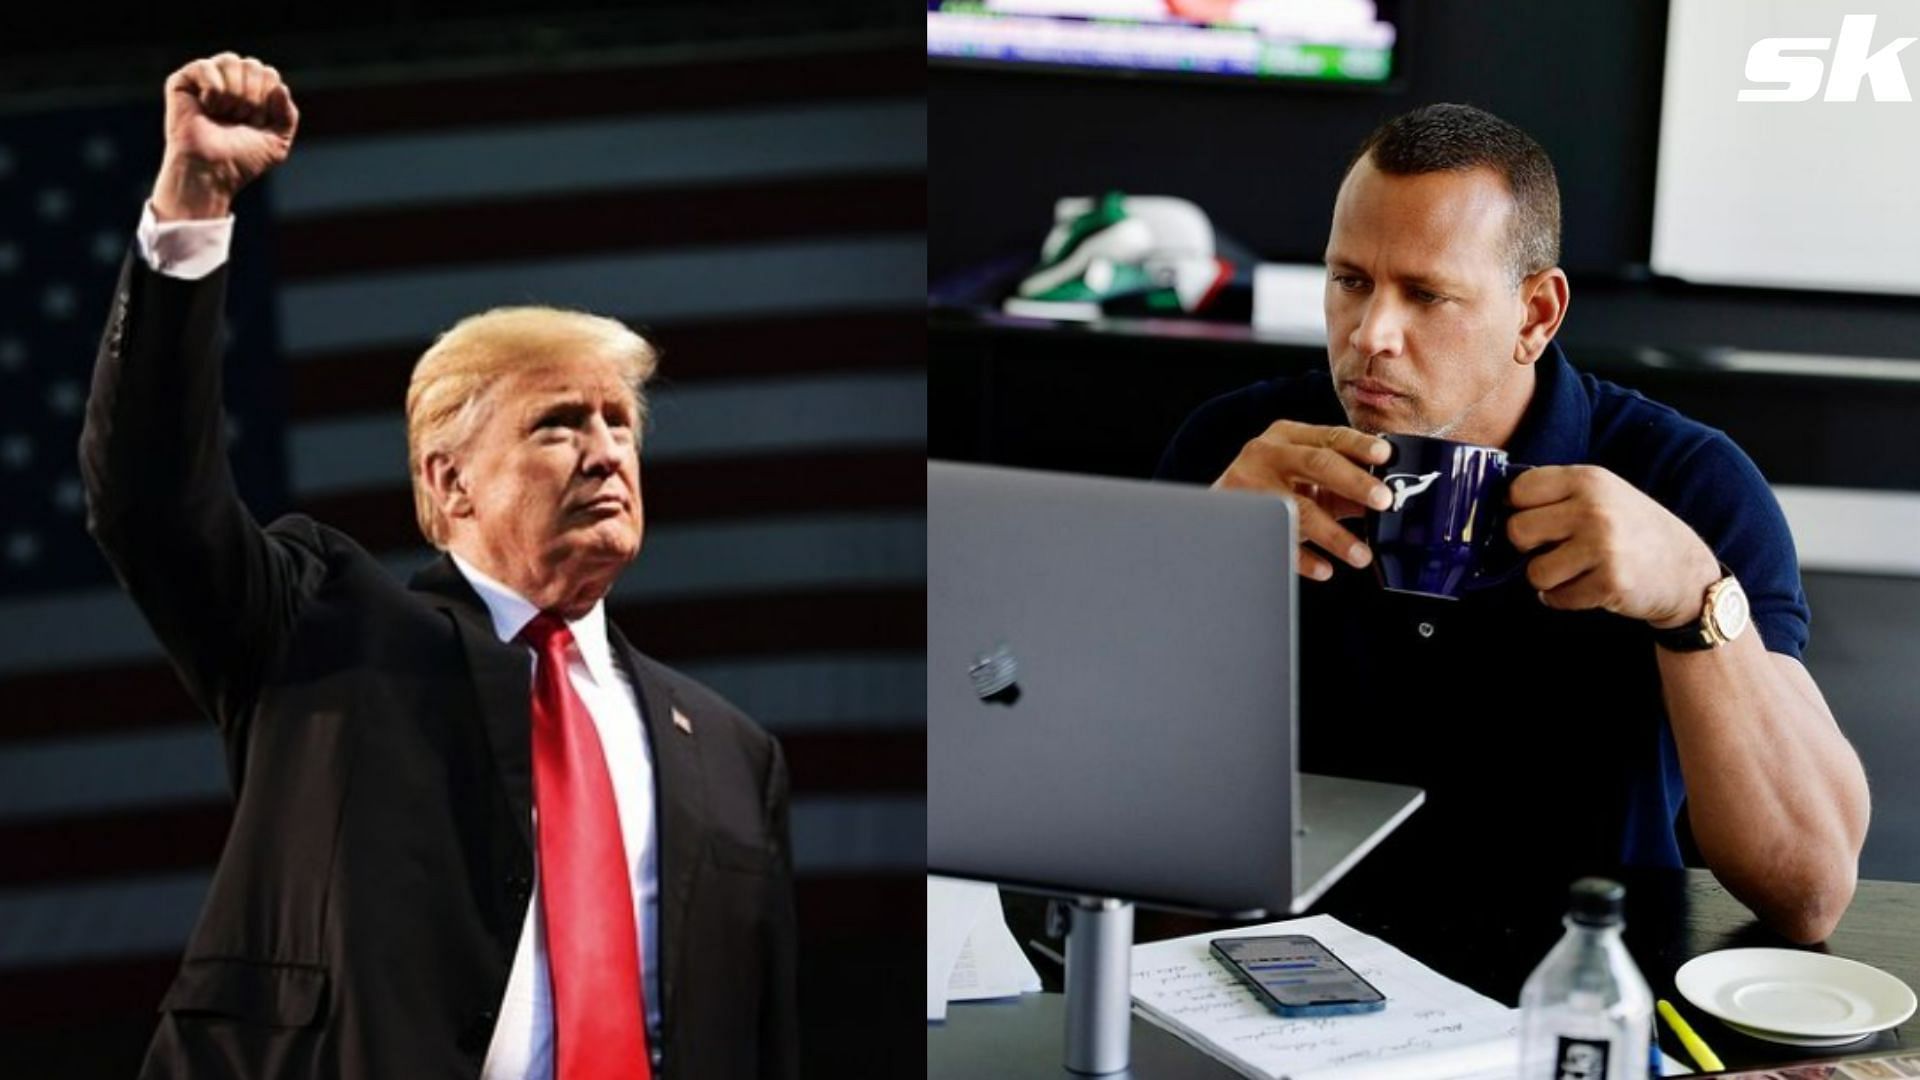 Photographs of Donald Trump and Alex Rodriguez sourced via their personal Instagram